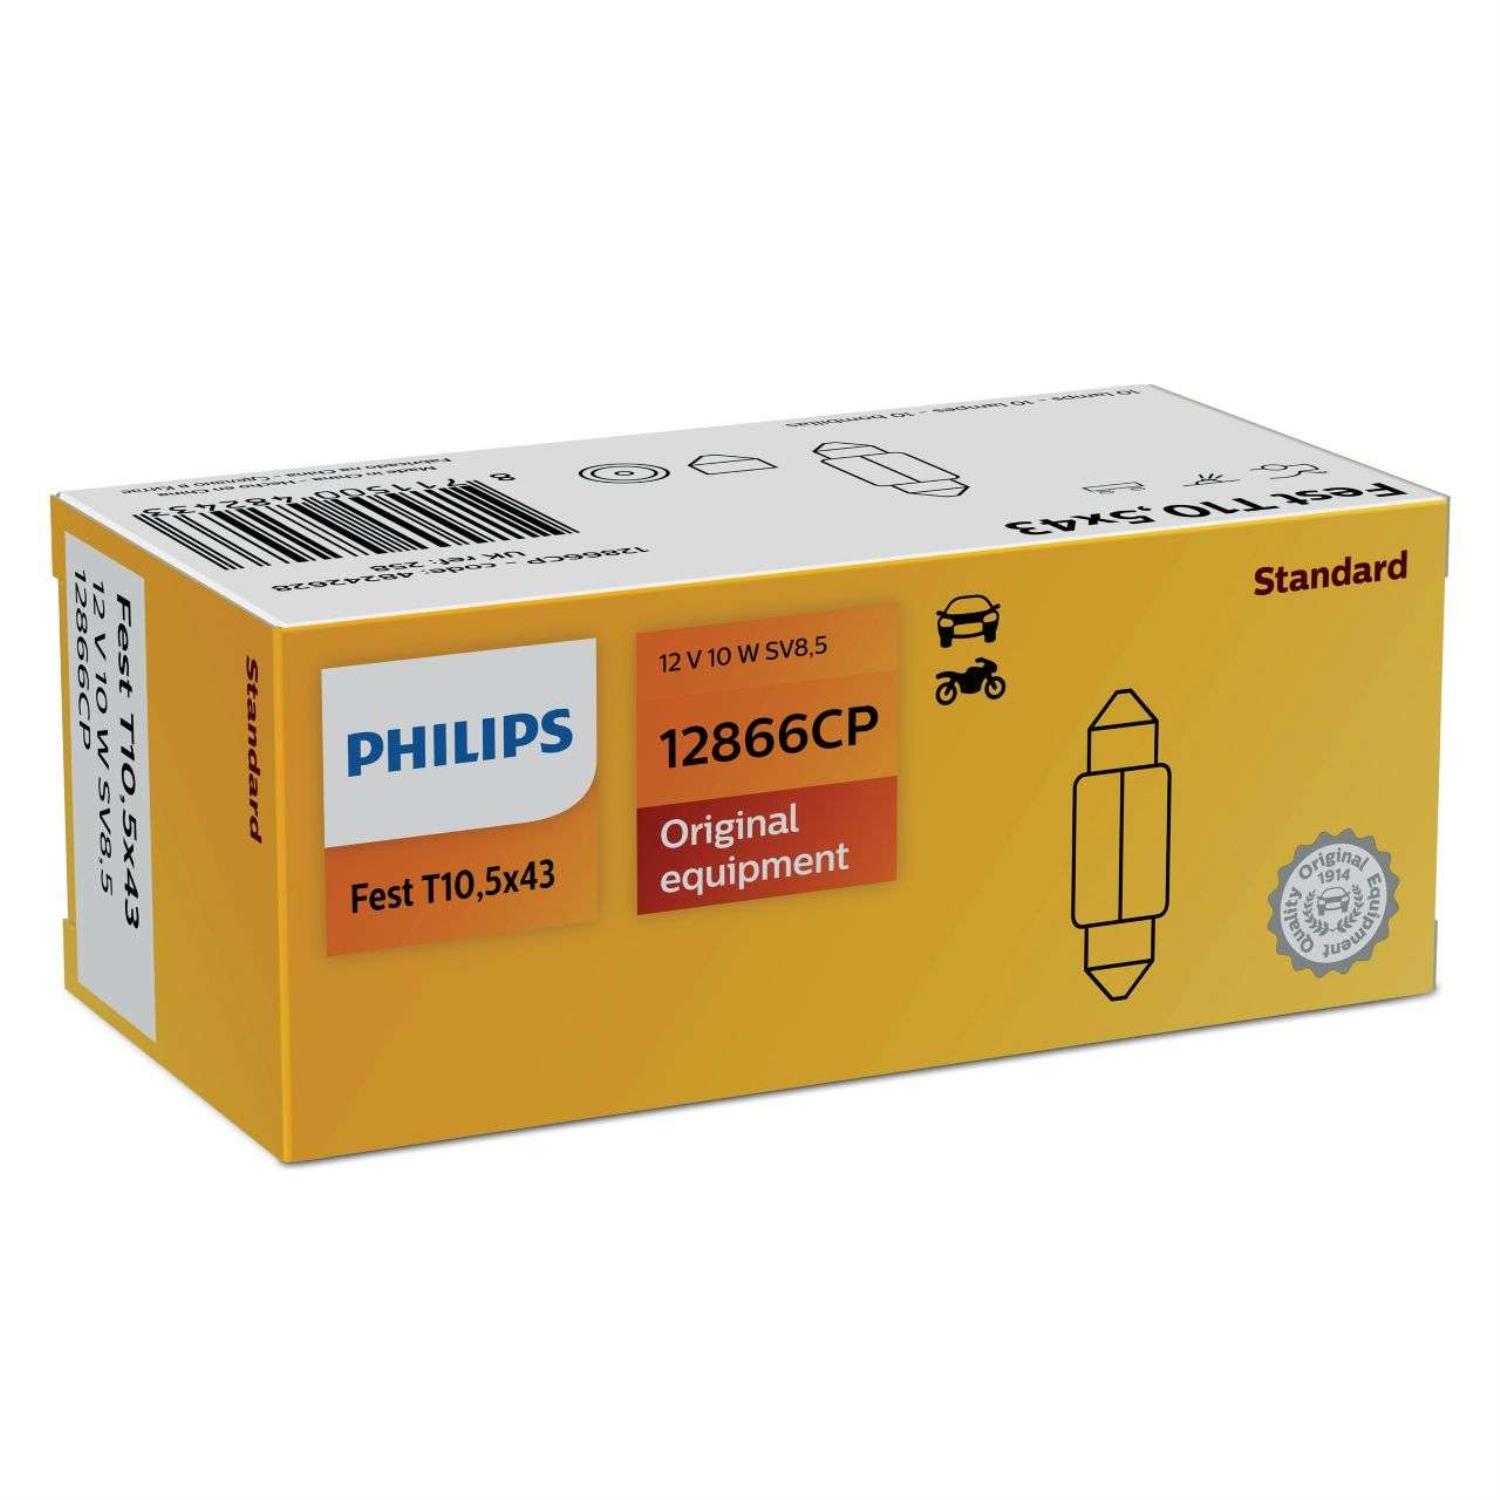 PHILIPS 12866CP Glühlampe Beleuchtung